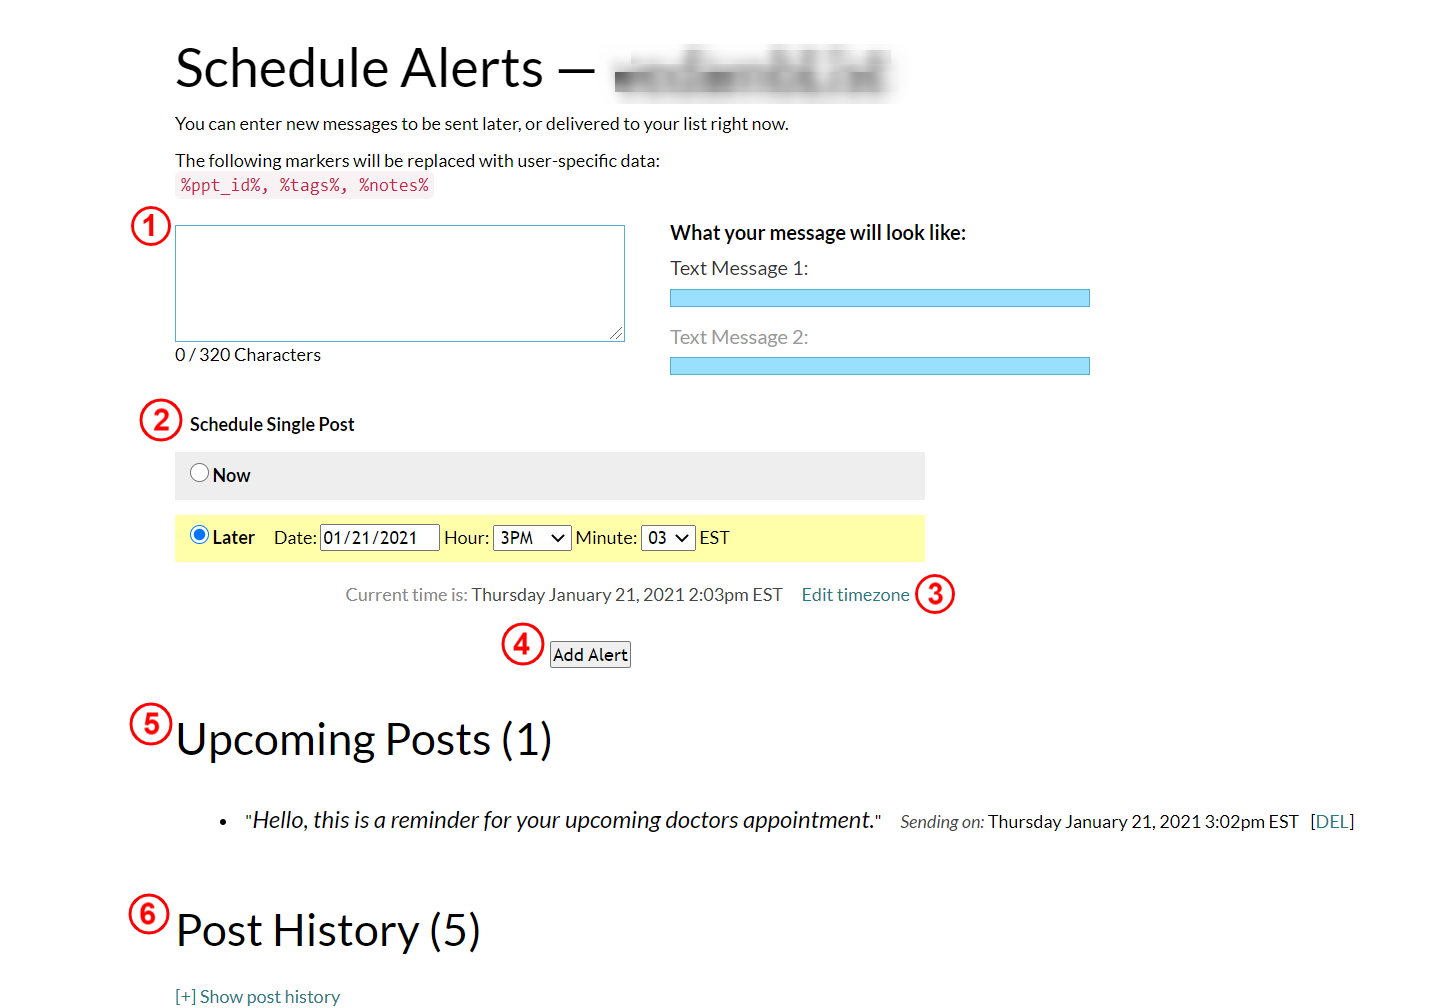 screenshot_-_schedule_alerts_labeled.png